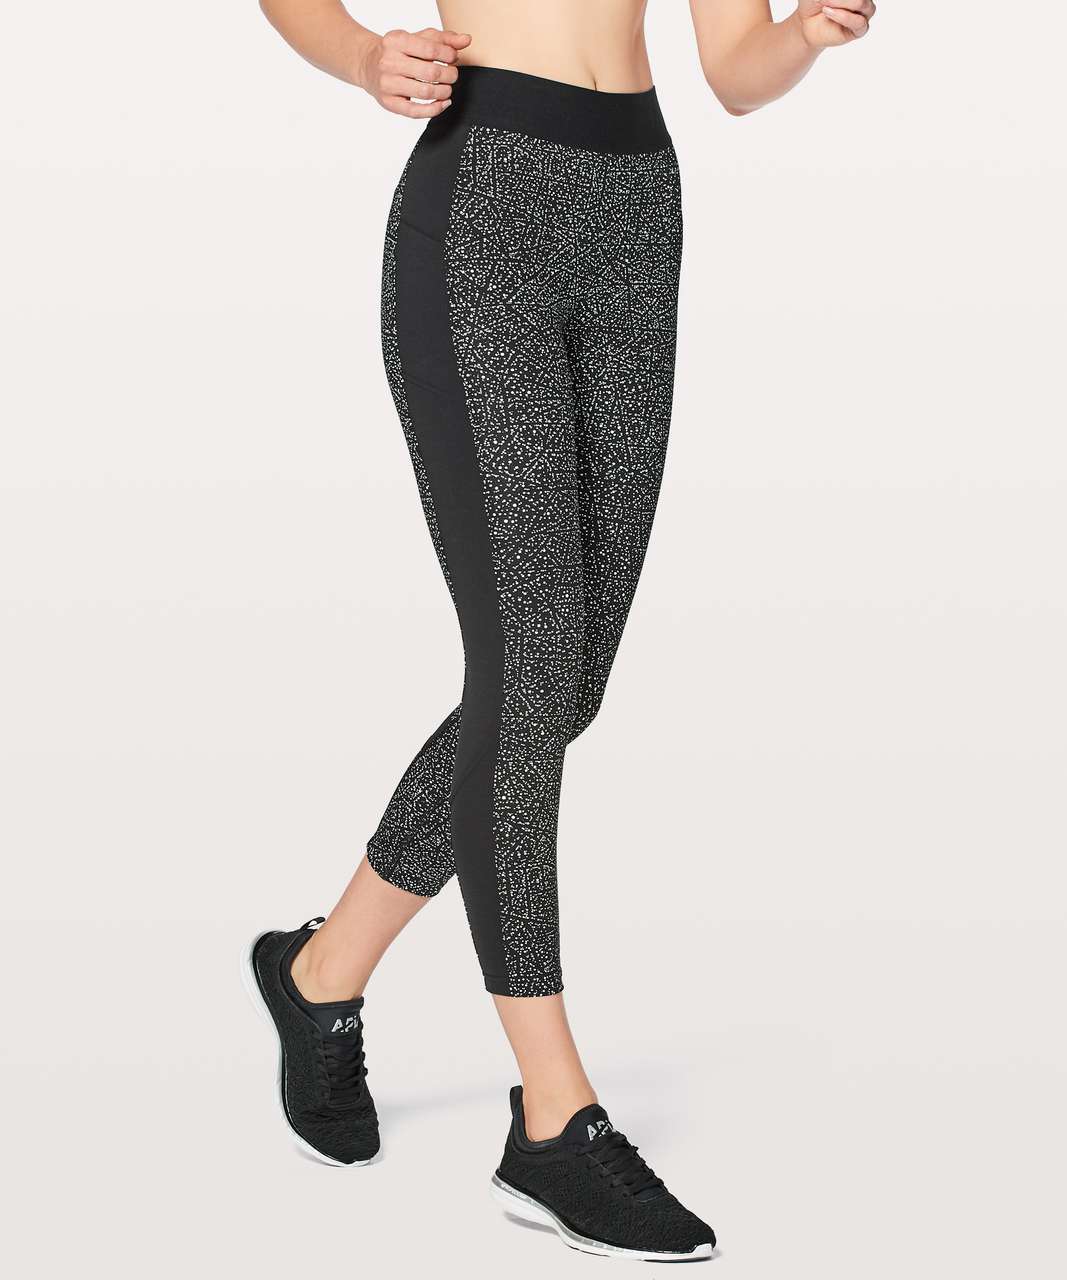 Sweat Box - Our FAVE Lululemon Align Pants are hitting Sweat Box shelves  this week in this pretty dark olive! Reserve your pair today! These will  sell quickly! #lululemon #lululemonaddict #welovelululemon #renoletssweat #